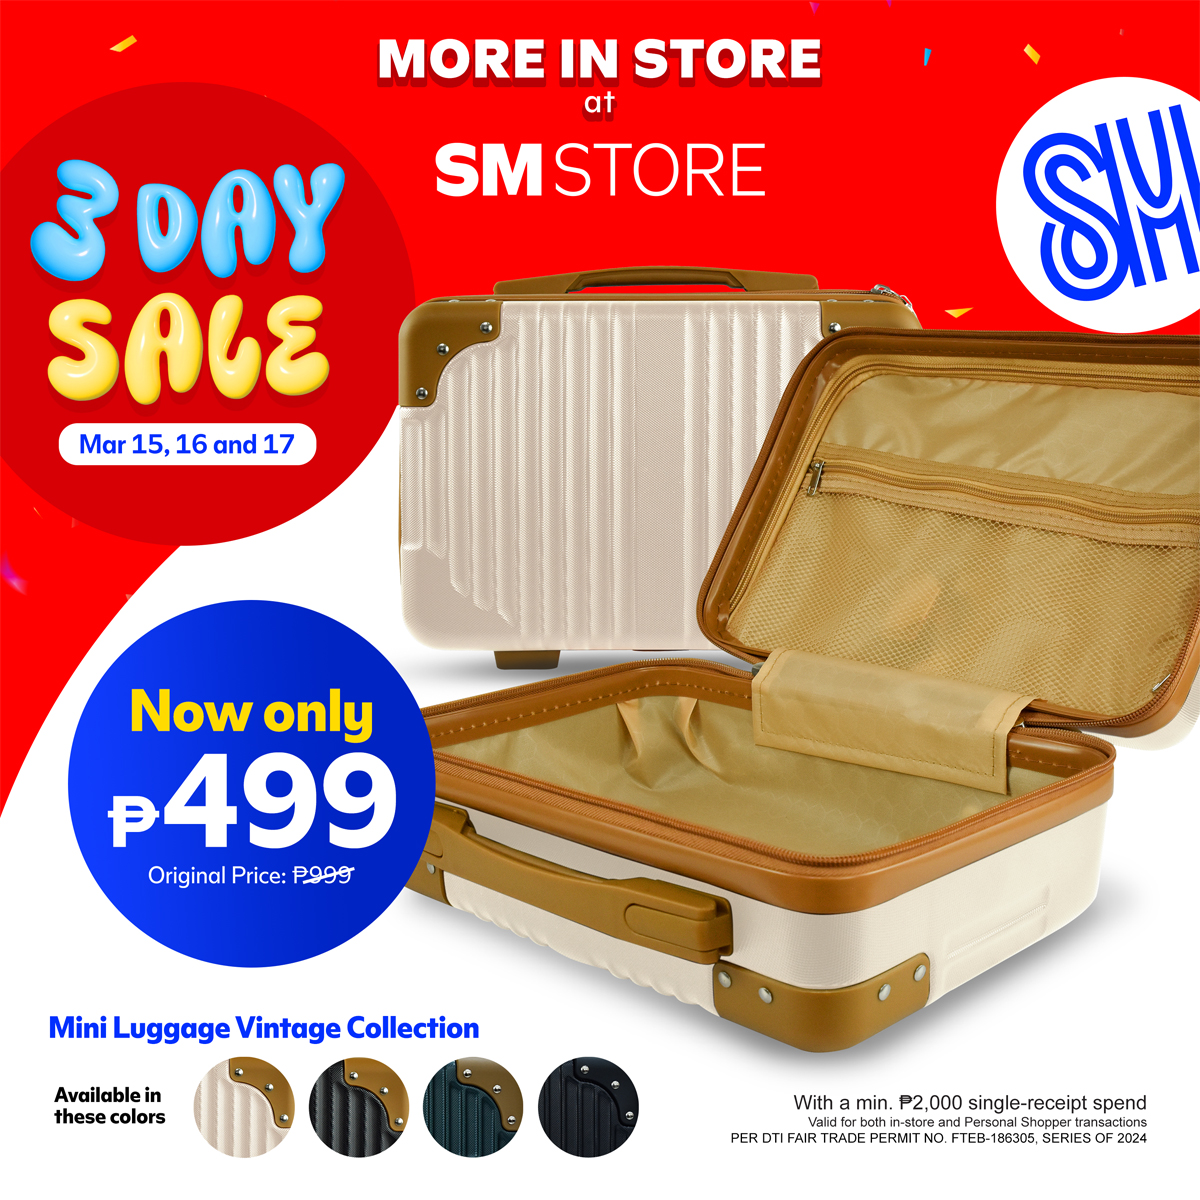 mini luggage vintage collection sm store 3 day sale